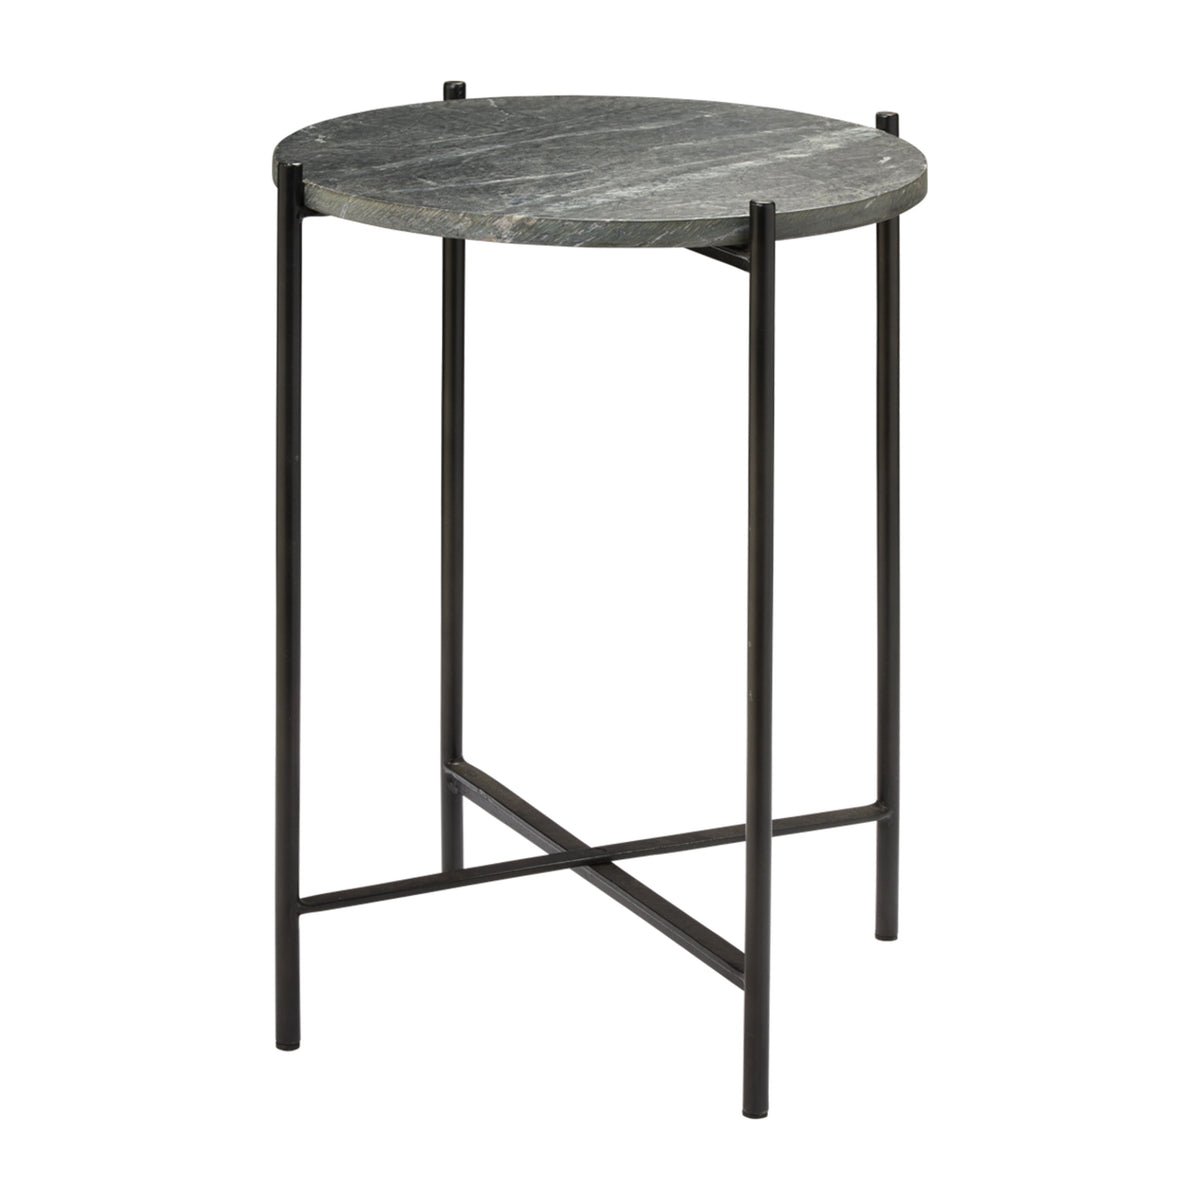 Jamie Young Company - 20DOMA-STBK - Domain Side Table - Domain - Black